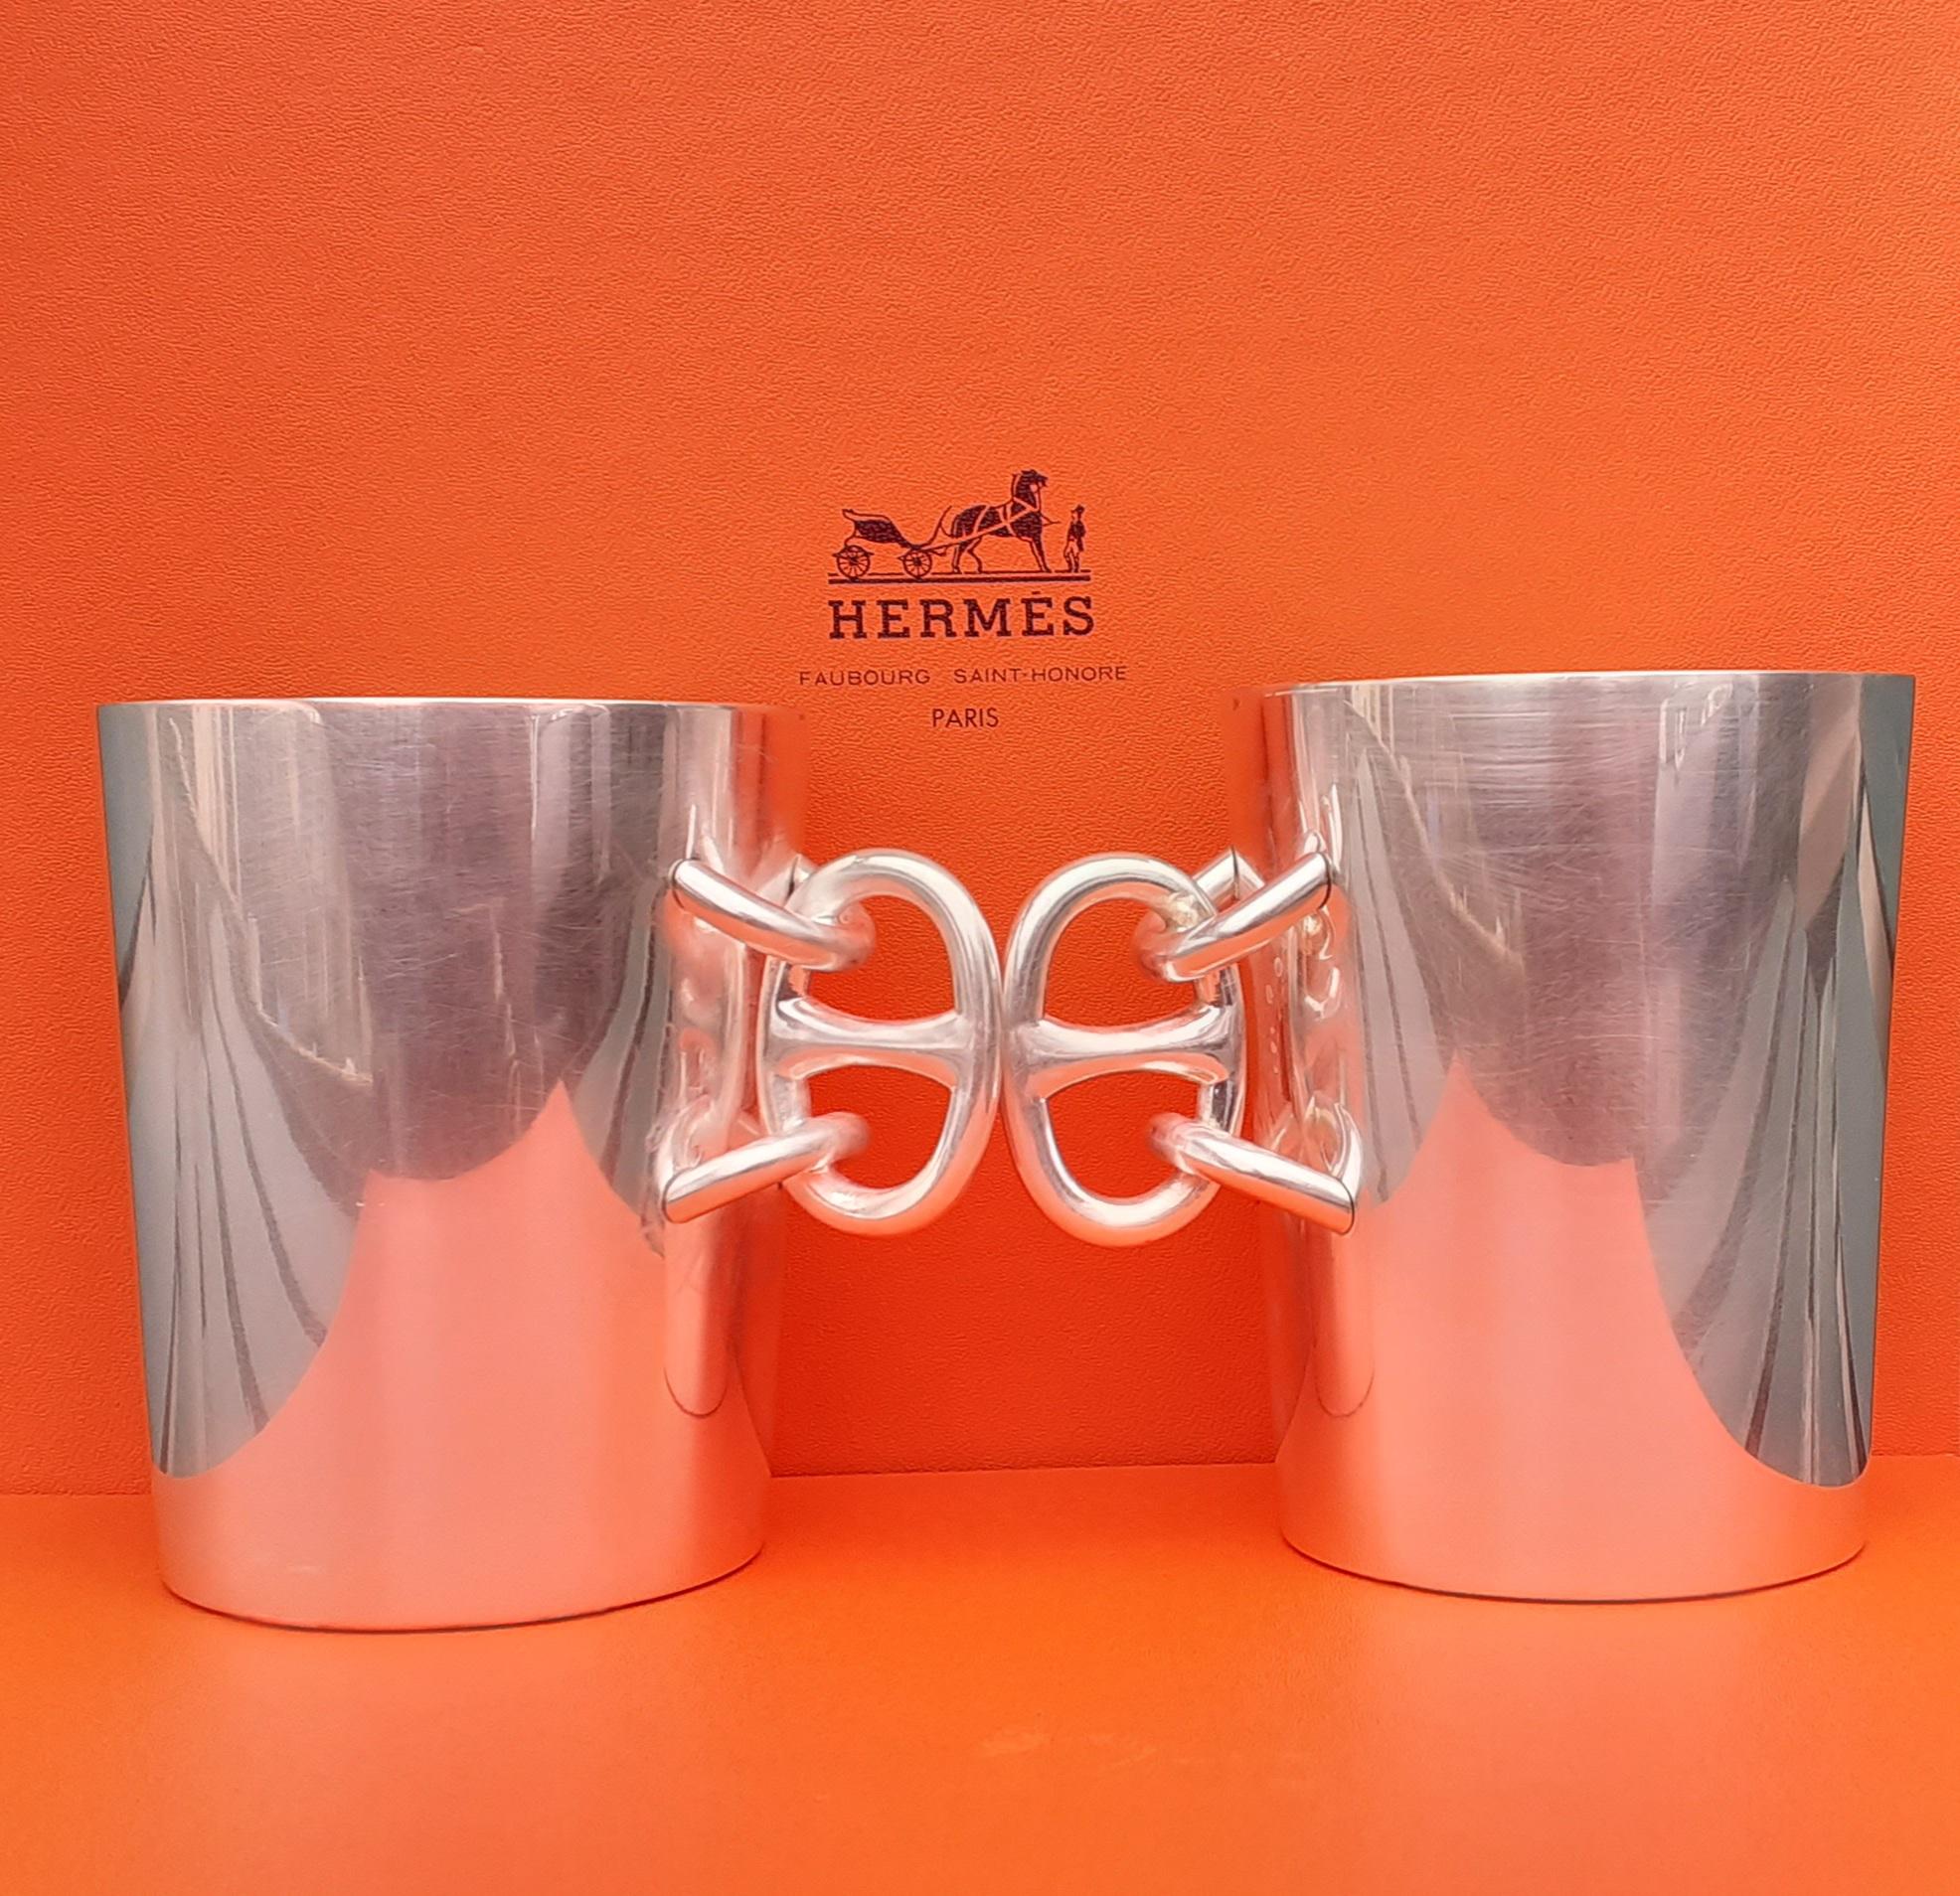 Hermès Set of 2 Silver-Tone Metal Cups Coffee Mugs Chaine d'Ancre Pattern RARE For Sale 5